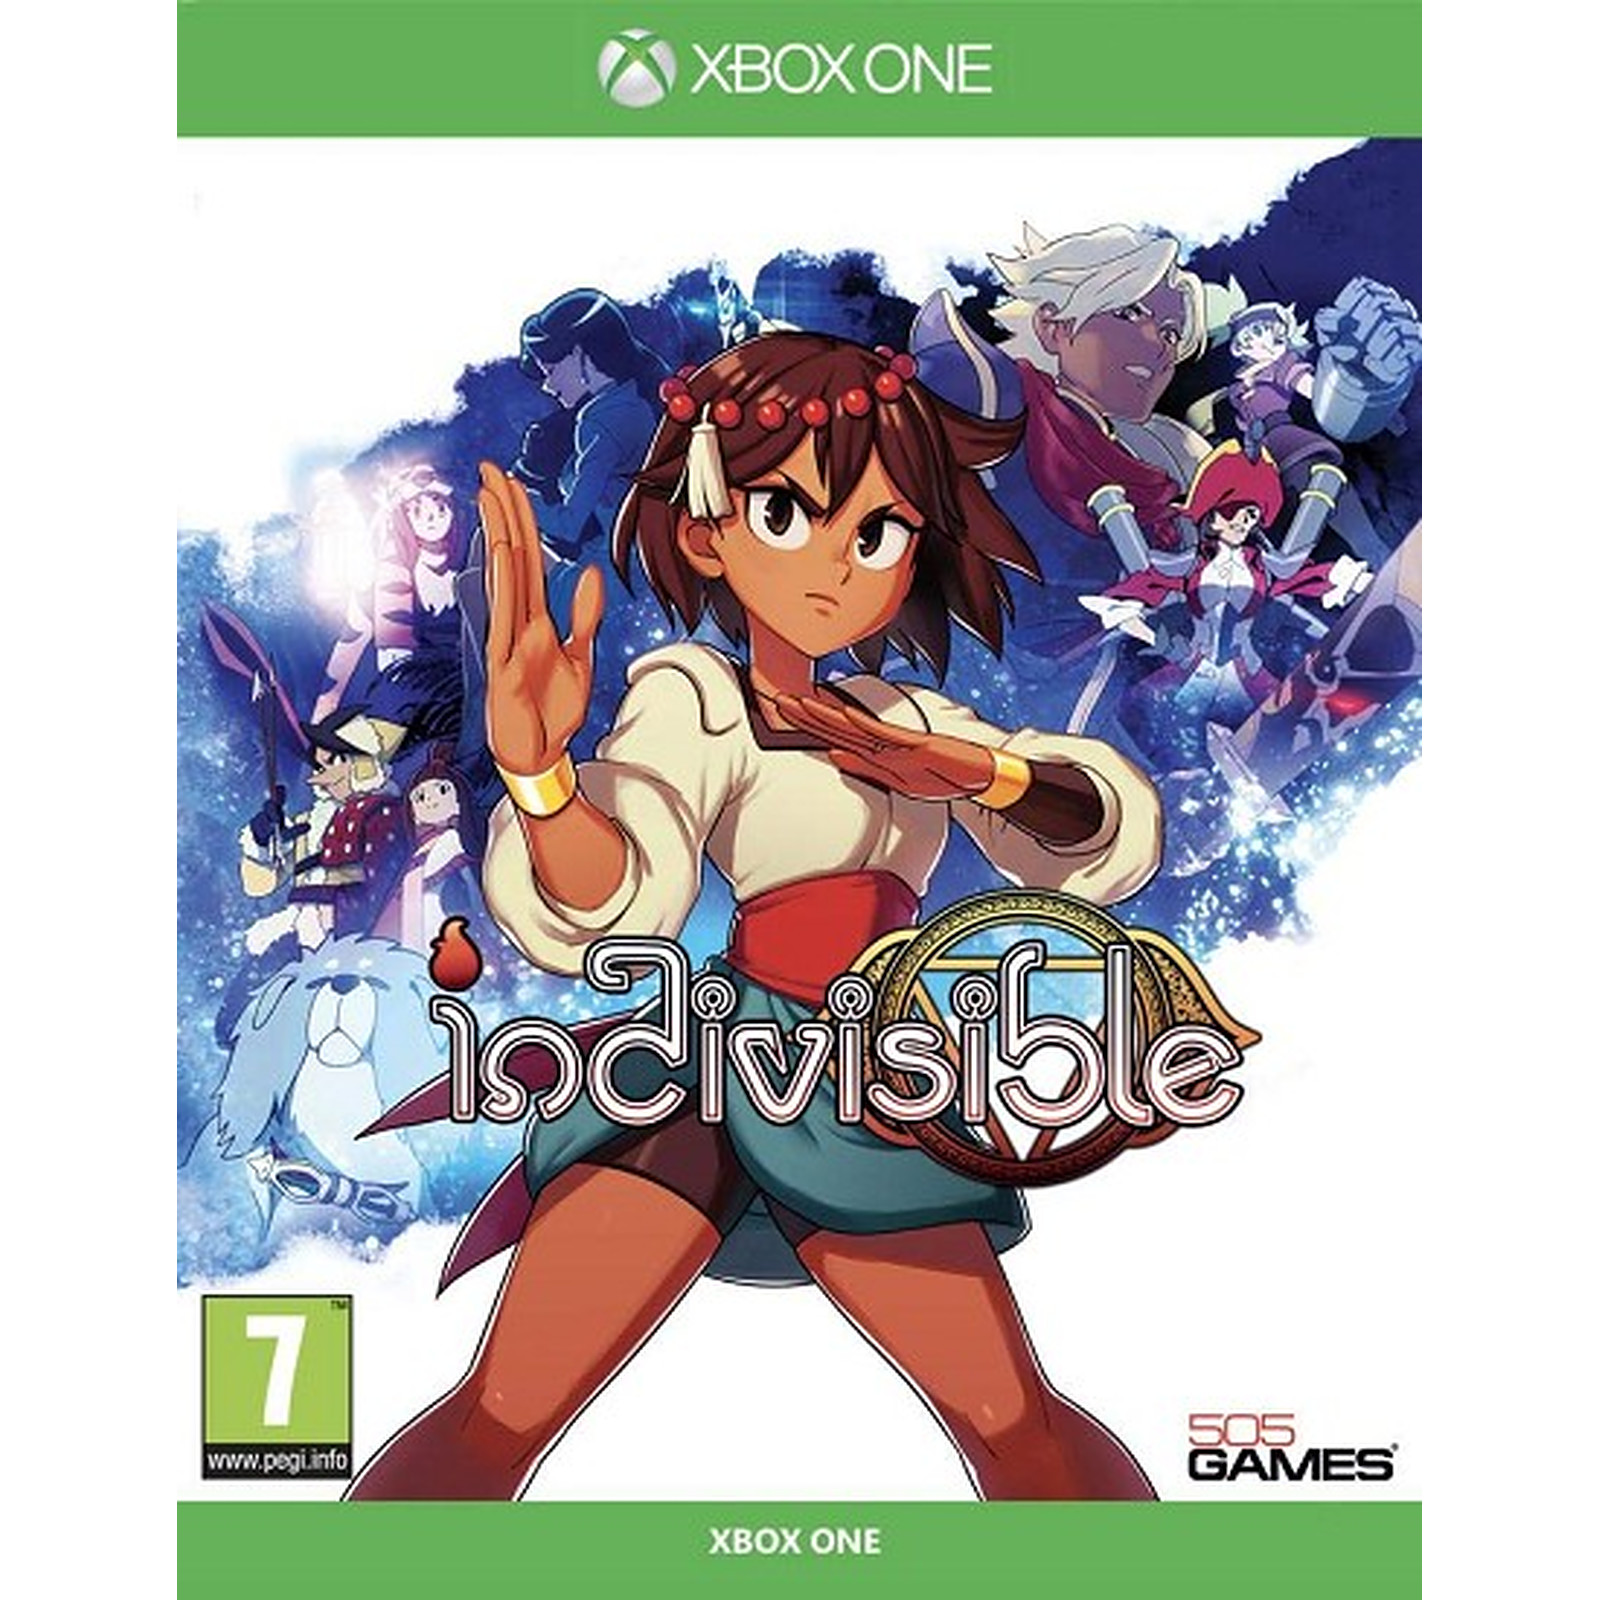 Indivisible (XBOX ONE) - Jeux Xbox One 505 Games